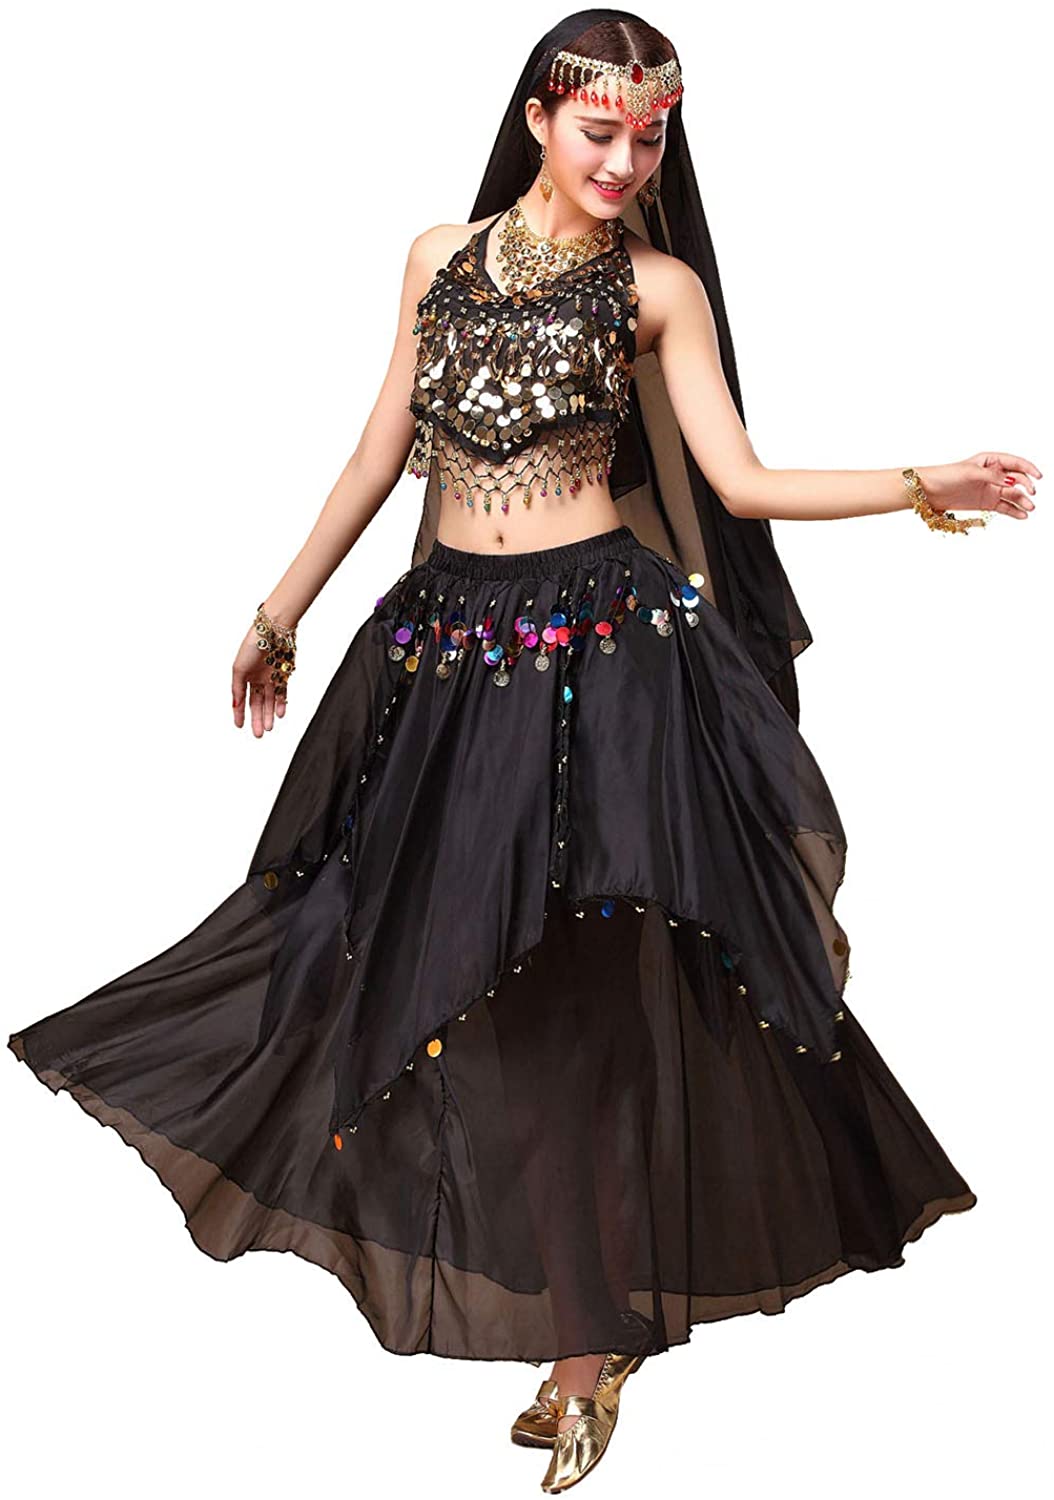 ORIDOOR Women Belly Dance Dress Set Crop Top Padded Bra Top Sparkling Belly Dance Chiffon Skirts with Coins 5-Piece Outfit | Decor Gifts and More